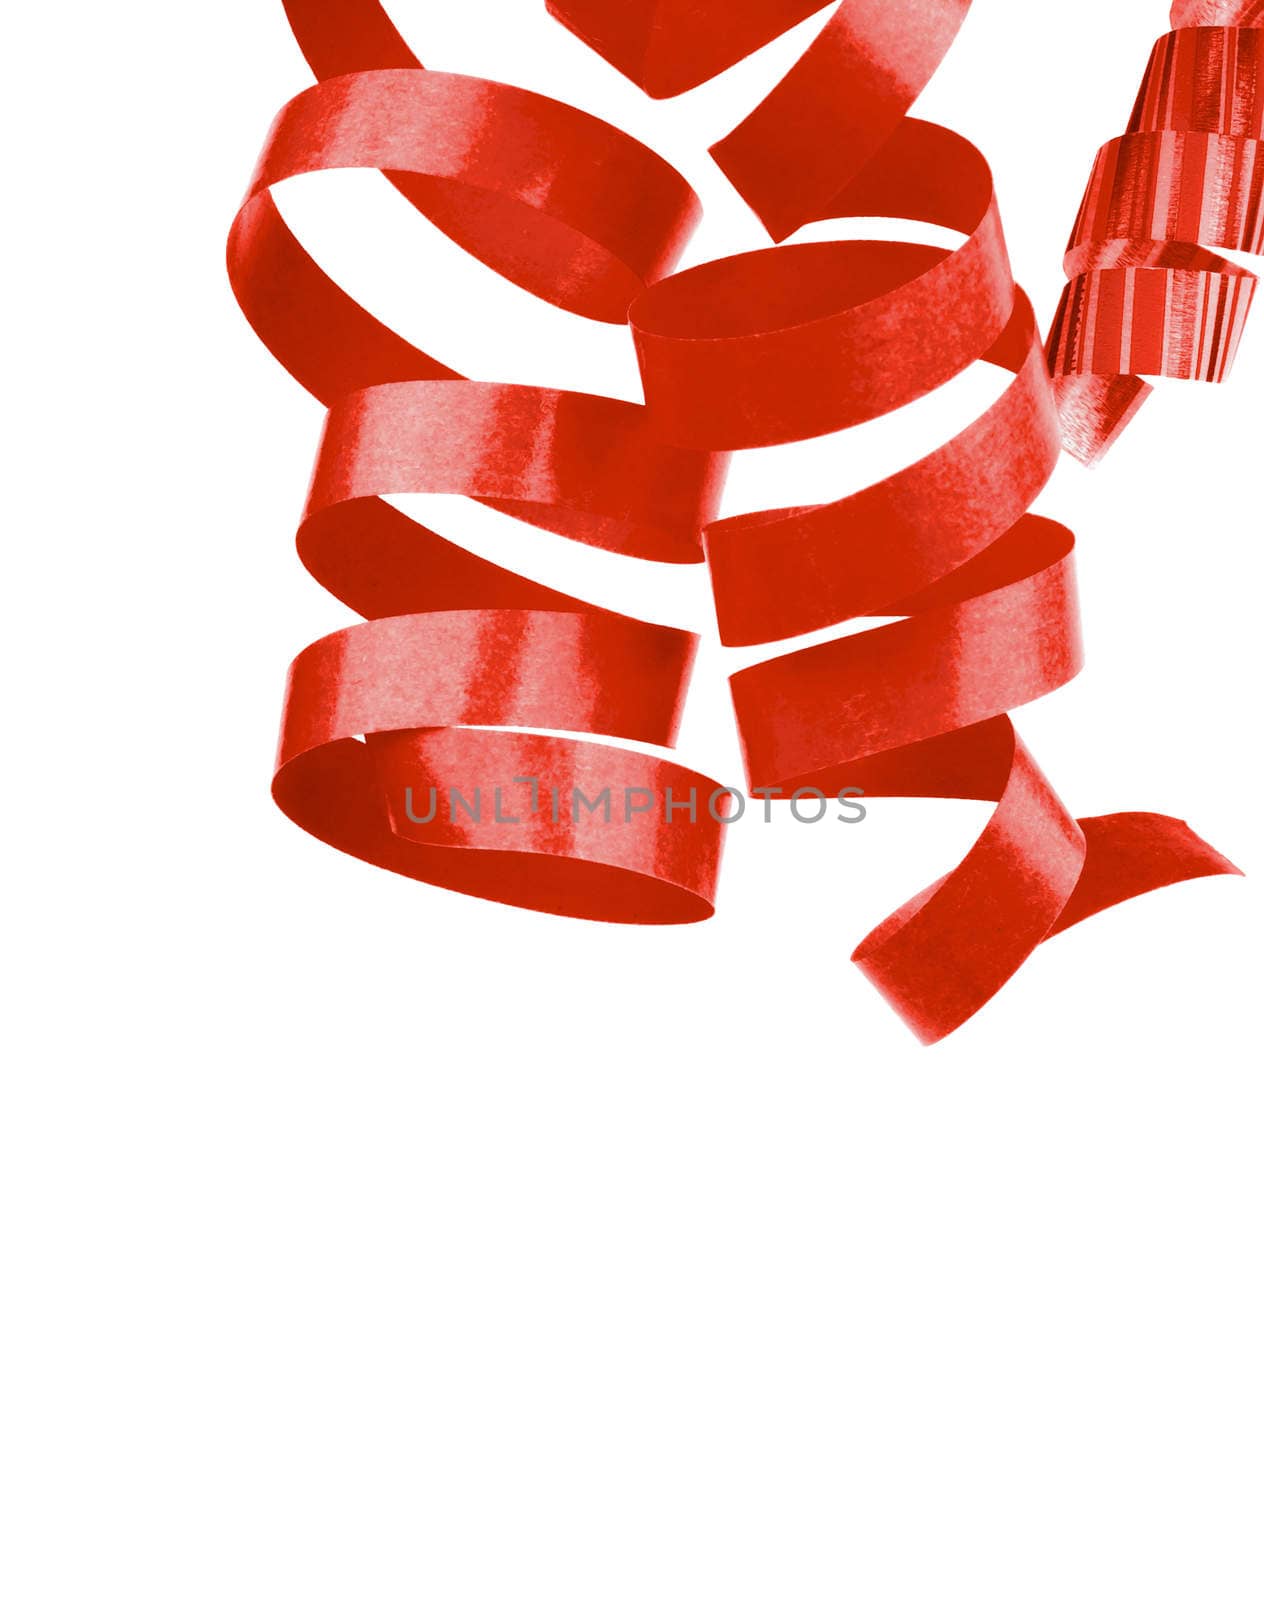 Three Red Curled Party Streamers Hanging down isolated on White background